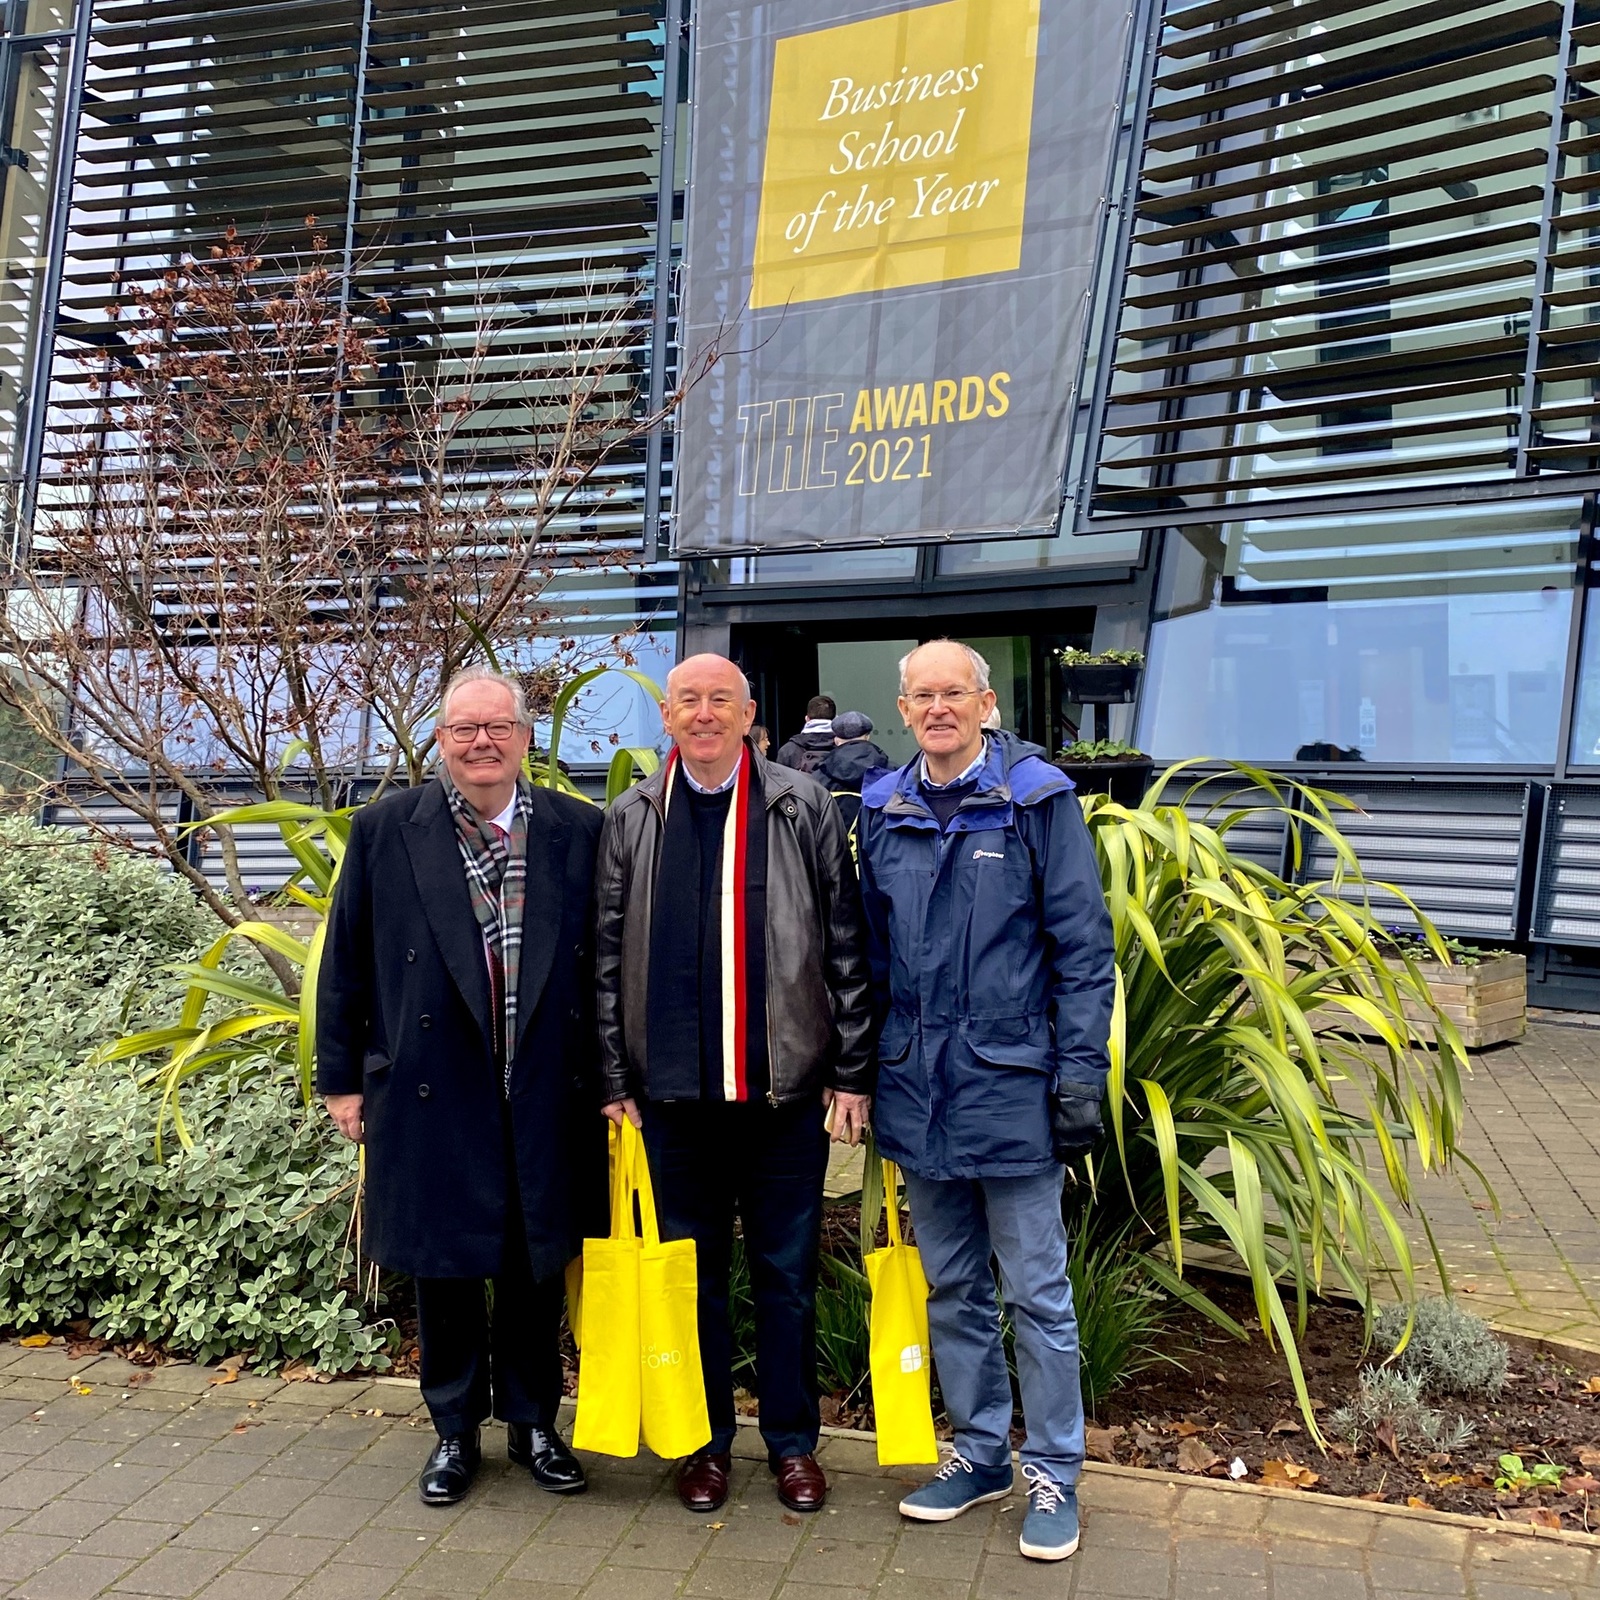 10 Dec 22 - As part of the Brigante’s Winter Gathering, delighted to be asked to visit our Alma Mater, Bradford University Business School alongside fellow Marketors, John Wheen and Peter Goudge. Great fun.